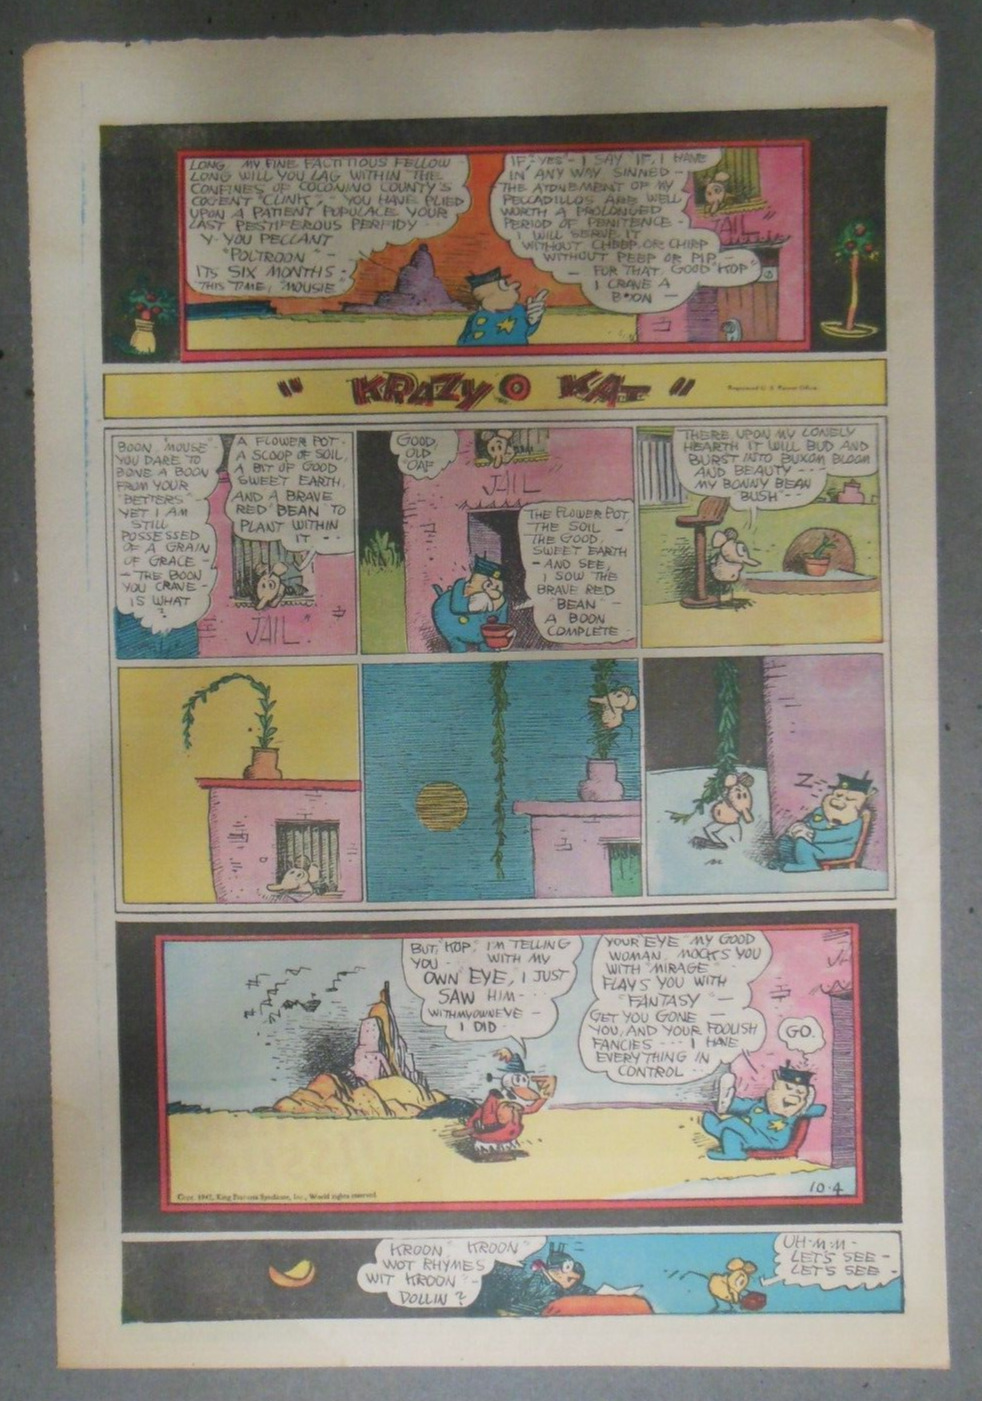 Krazy Kat Sunday Page by George Herriman from 10/4/1942 Size 11 x 15 inch Rare! Comic Books image